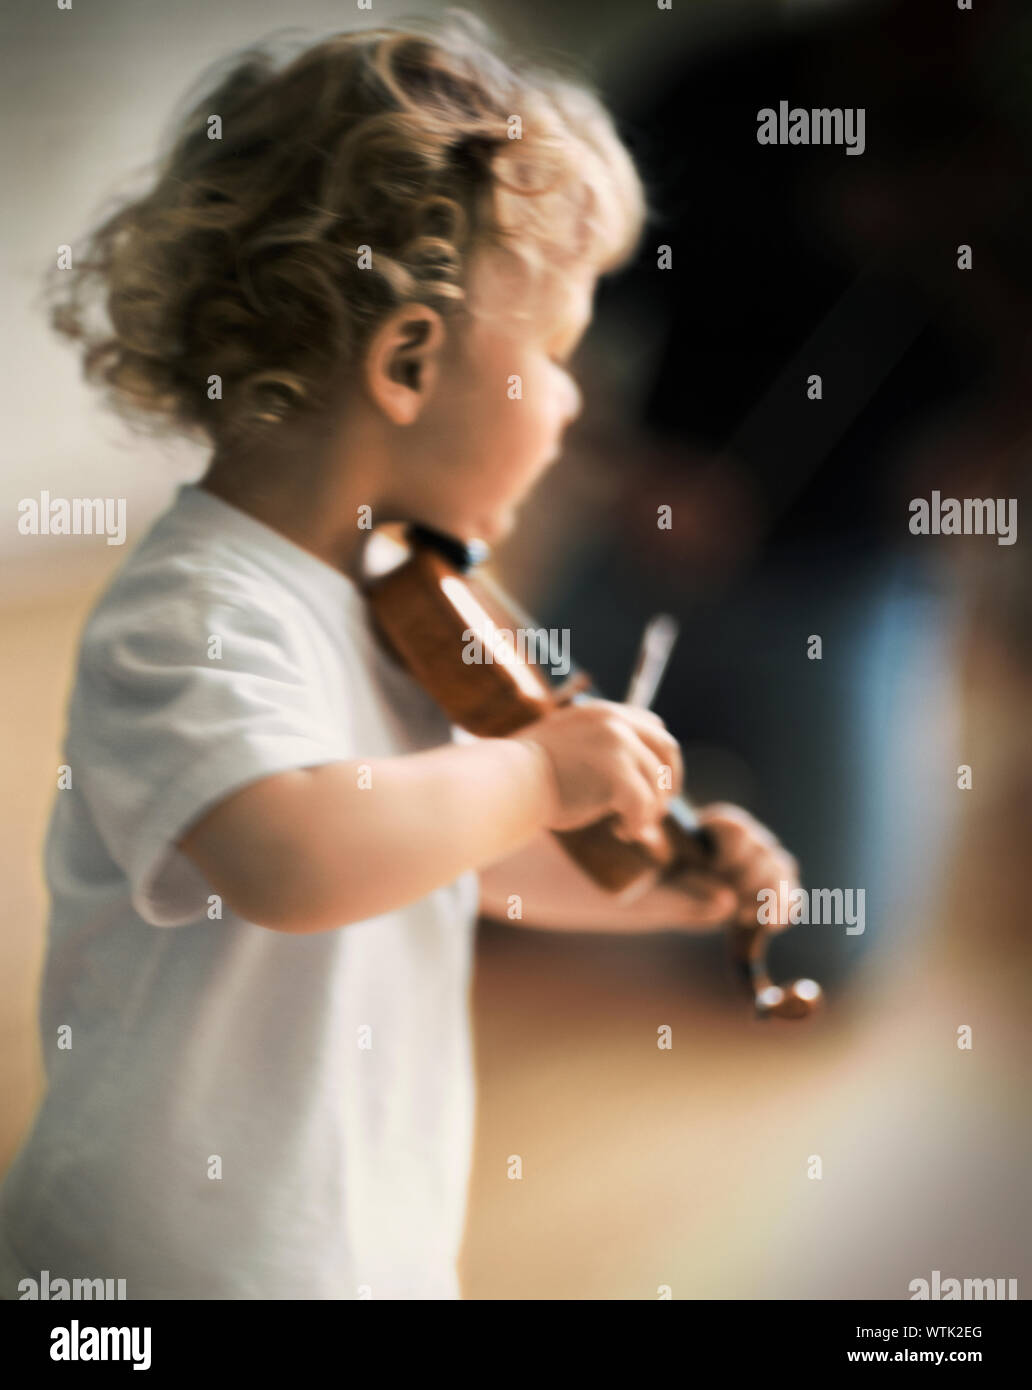 Toddler boy playing a miniature violin Stock Photo